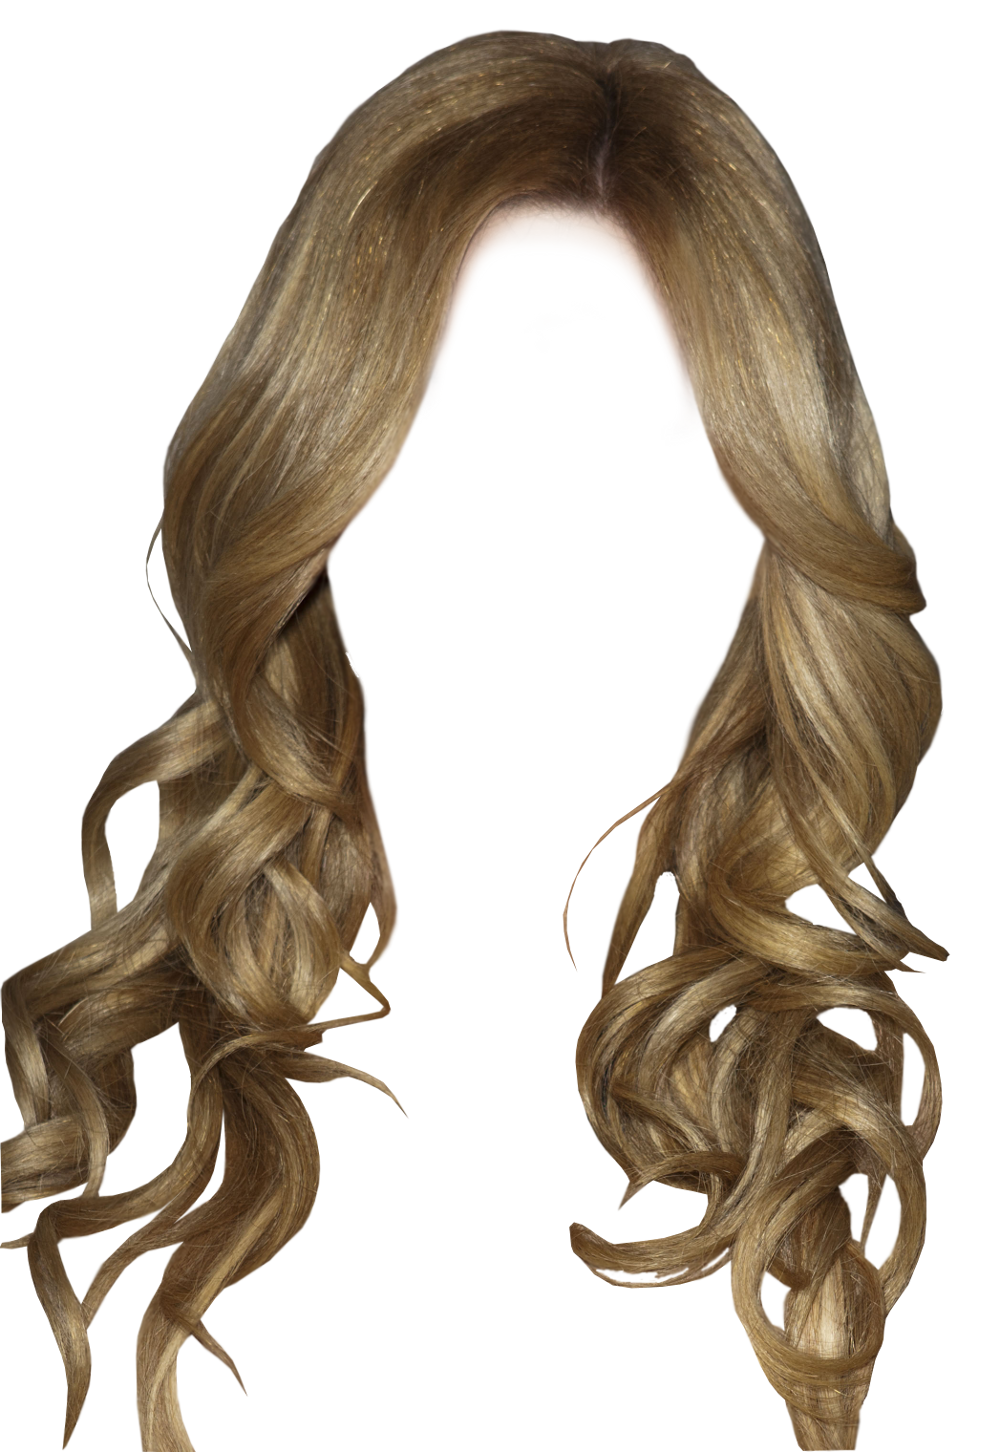 Virtual Hair Color Try-On Tool for Hair Makeovers - Garnier